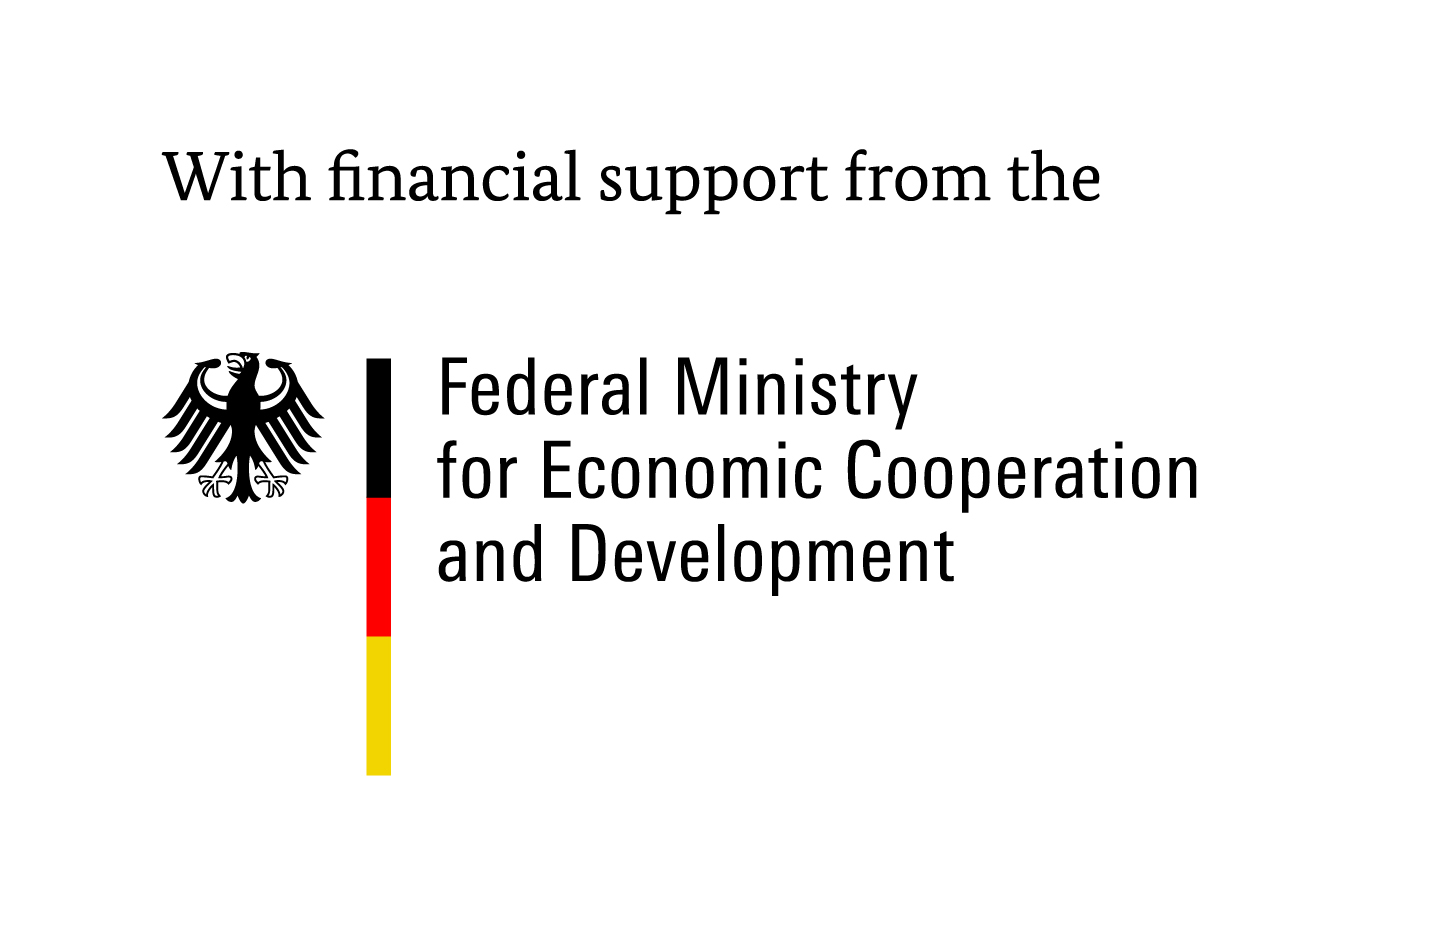 Logo: https://en.wikipedia.org/wiki/Federal_Ministry_for_Economic_Cooperation_and_Development